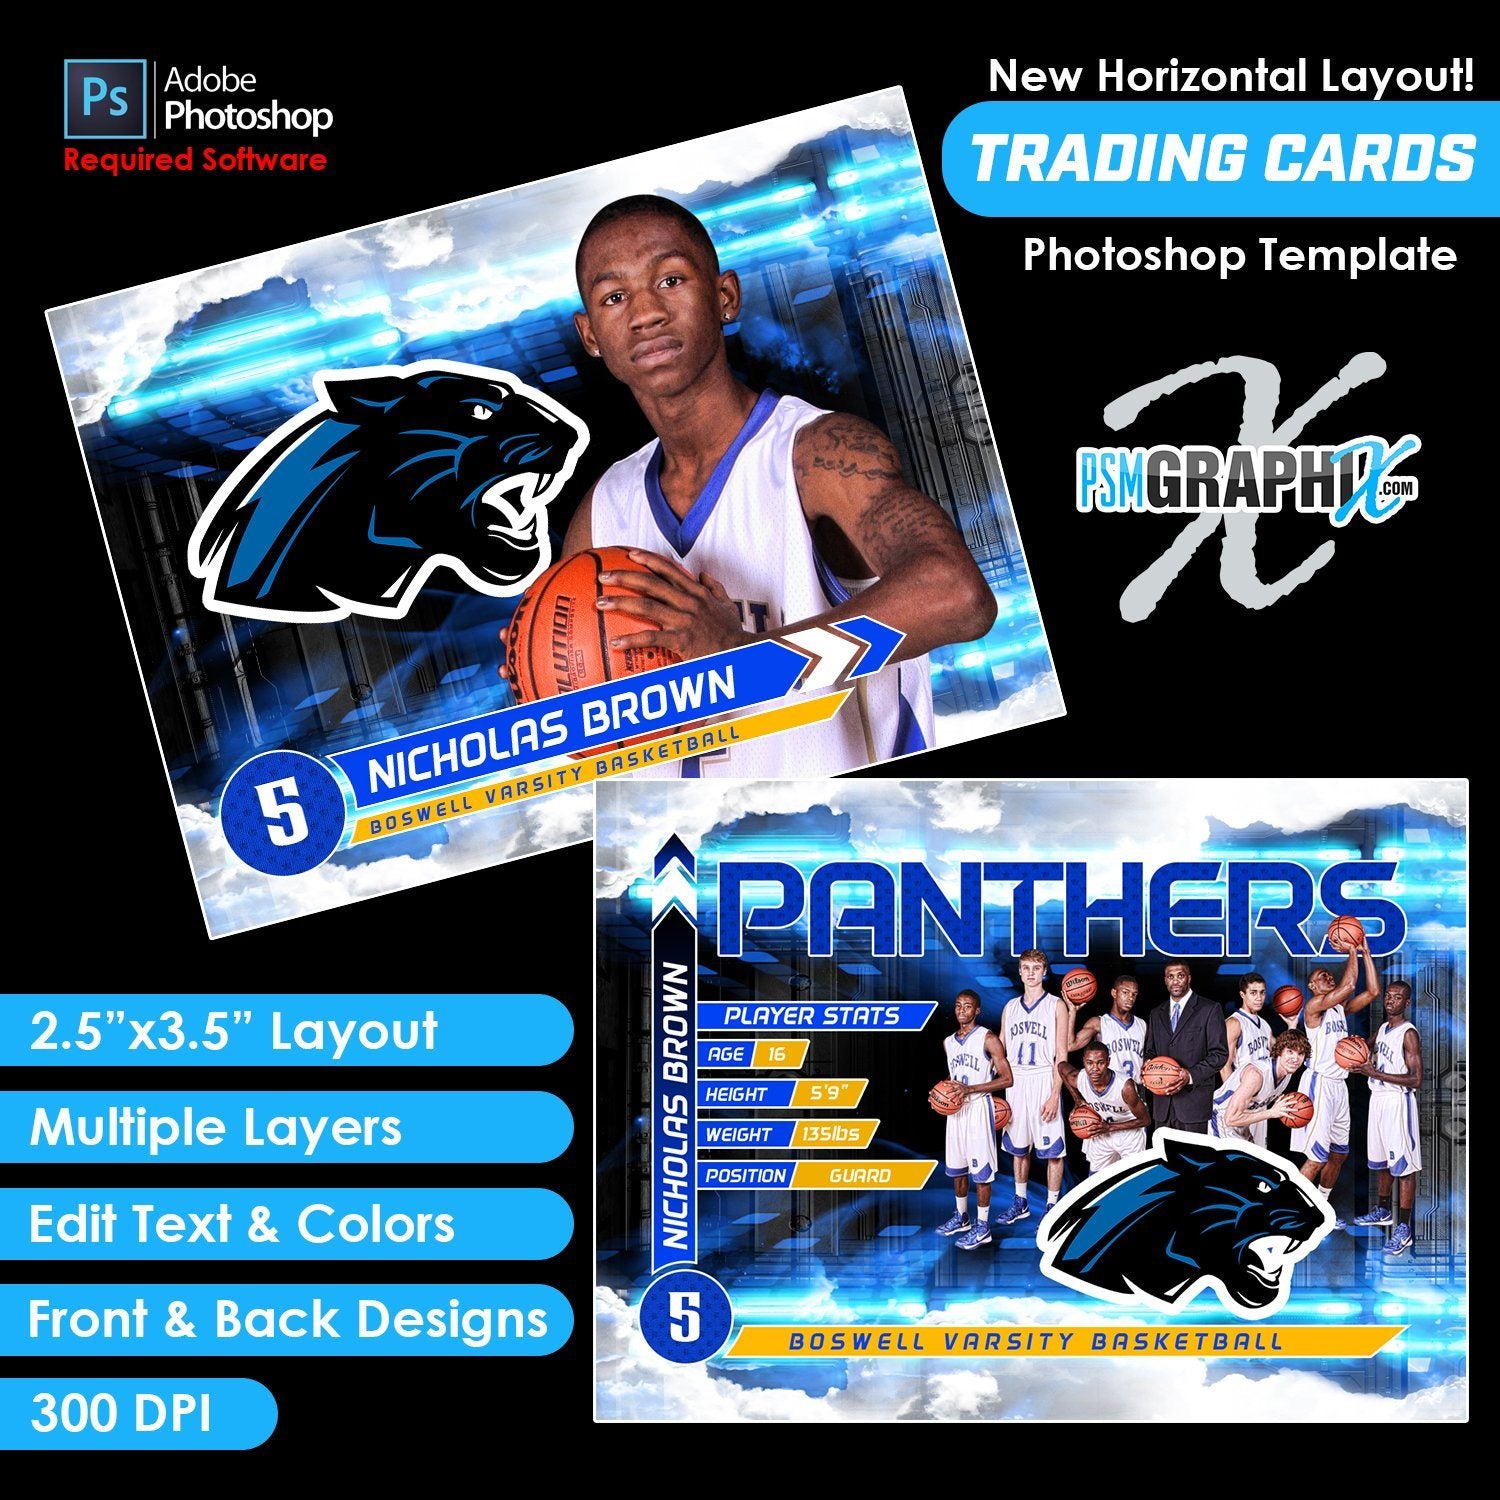 Hatch - V5 - Game Day Trading Card Template-Photoshop Template - PSMGraphix